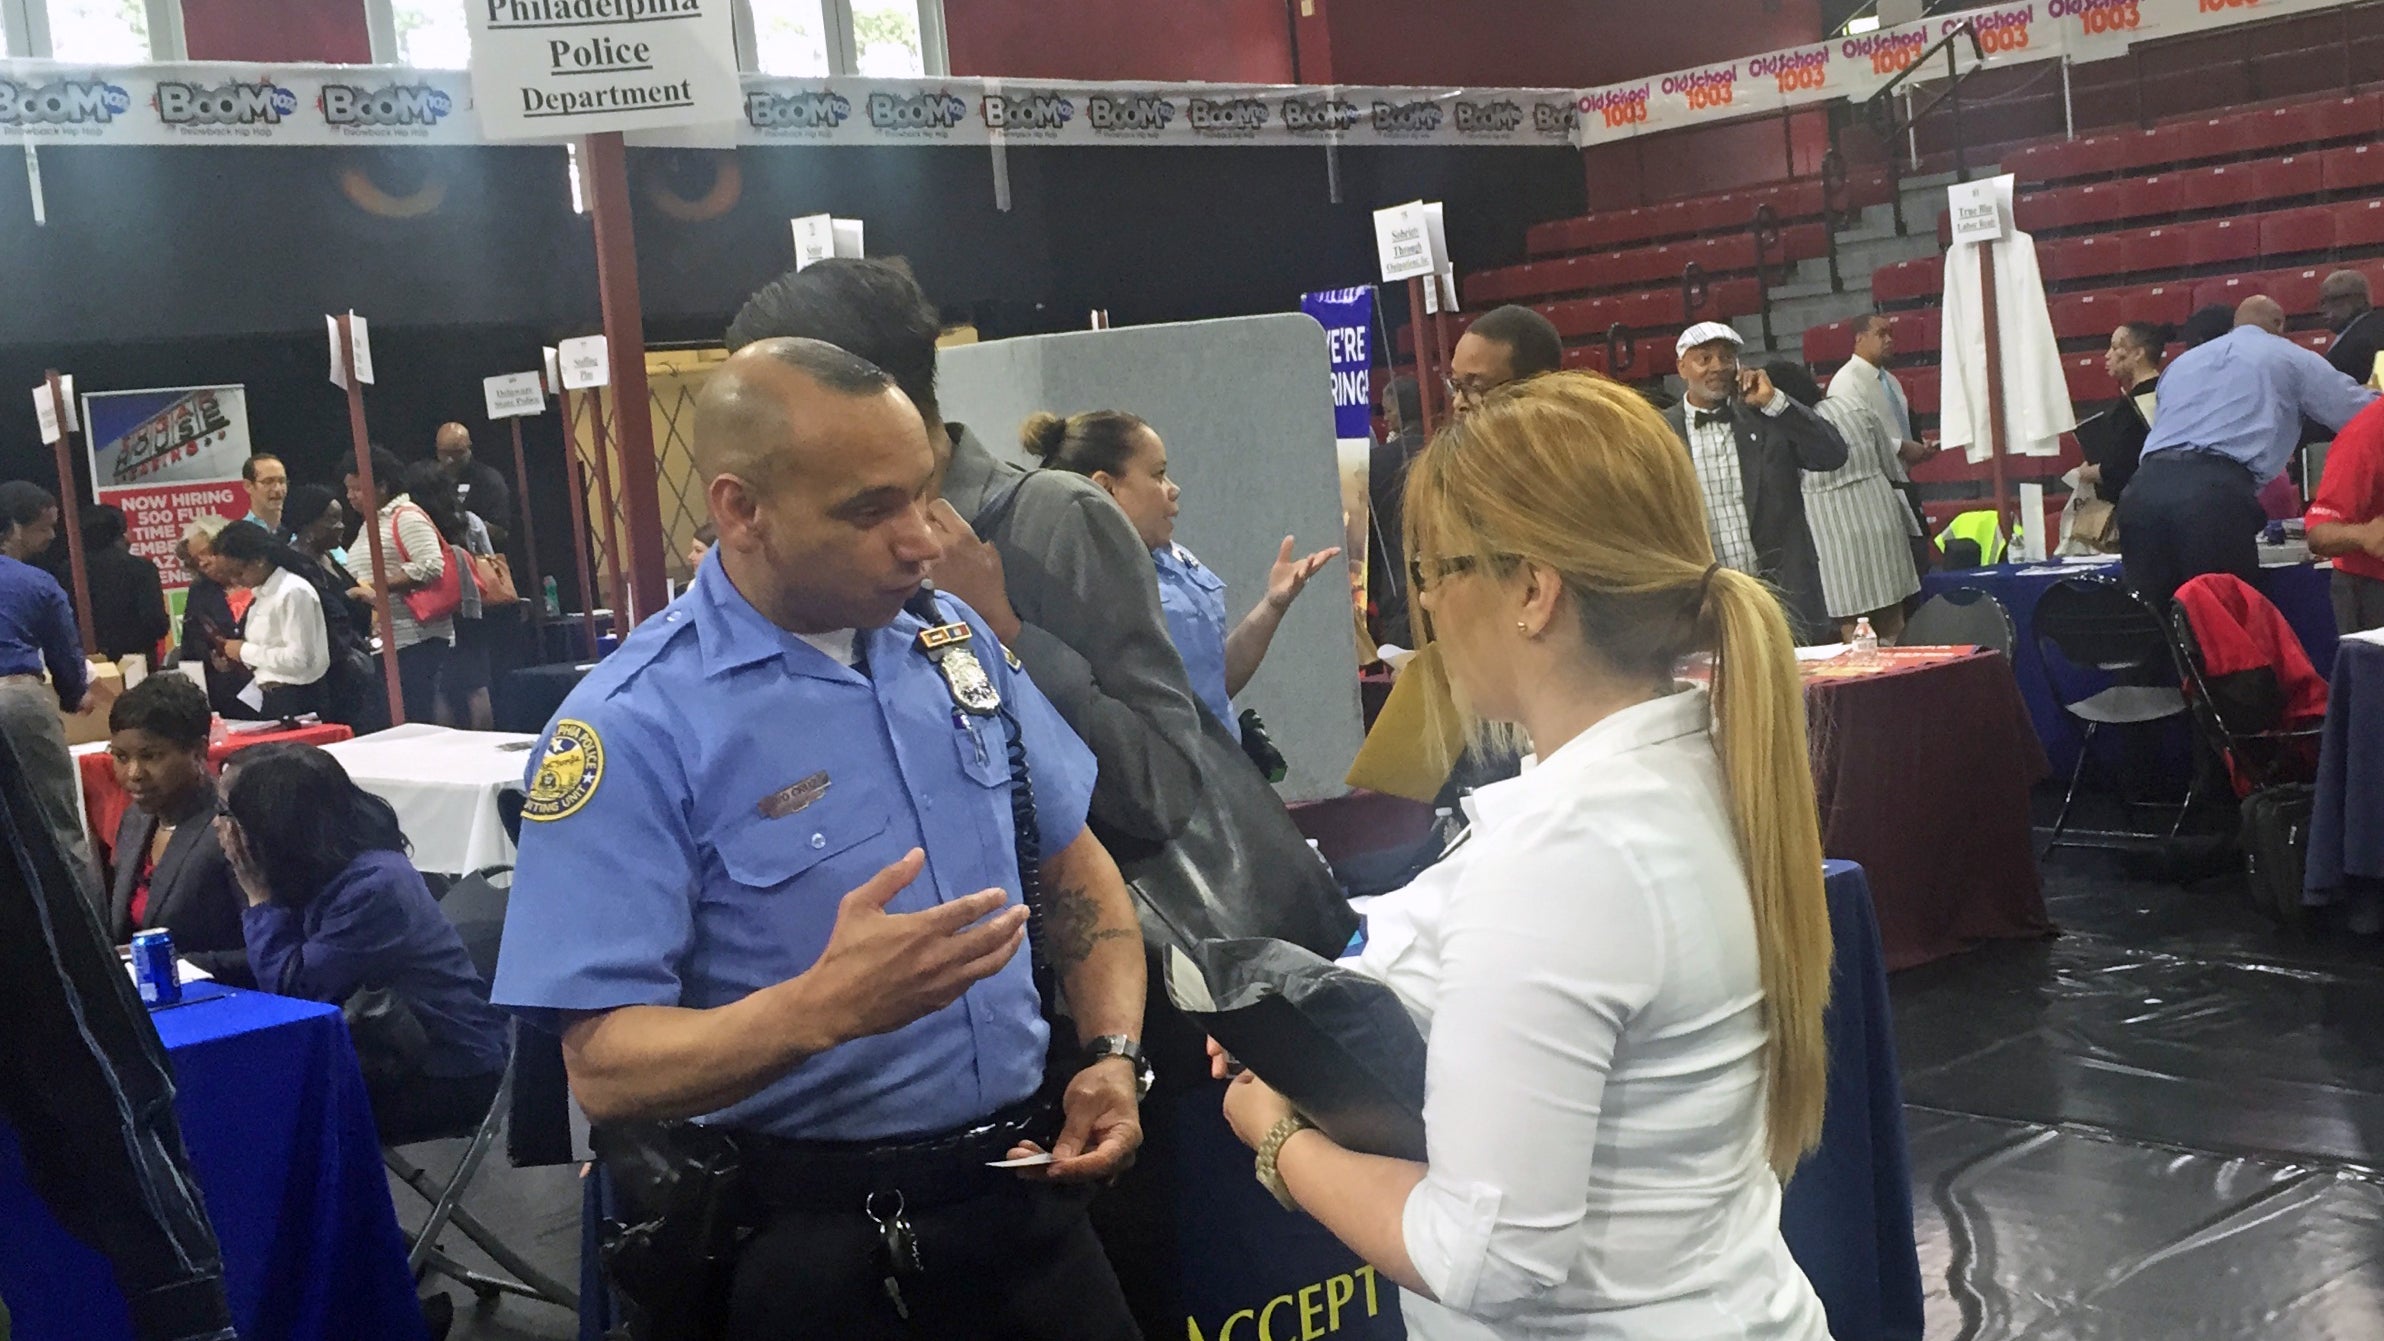 Officer Samuel Cruz with the Philadelphia Police Department's recruiting division chats with a would-be recruit at a job fair at Temple University.(Bobby Allyn/WHYY)